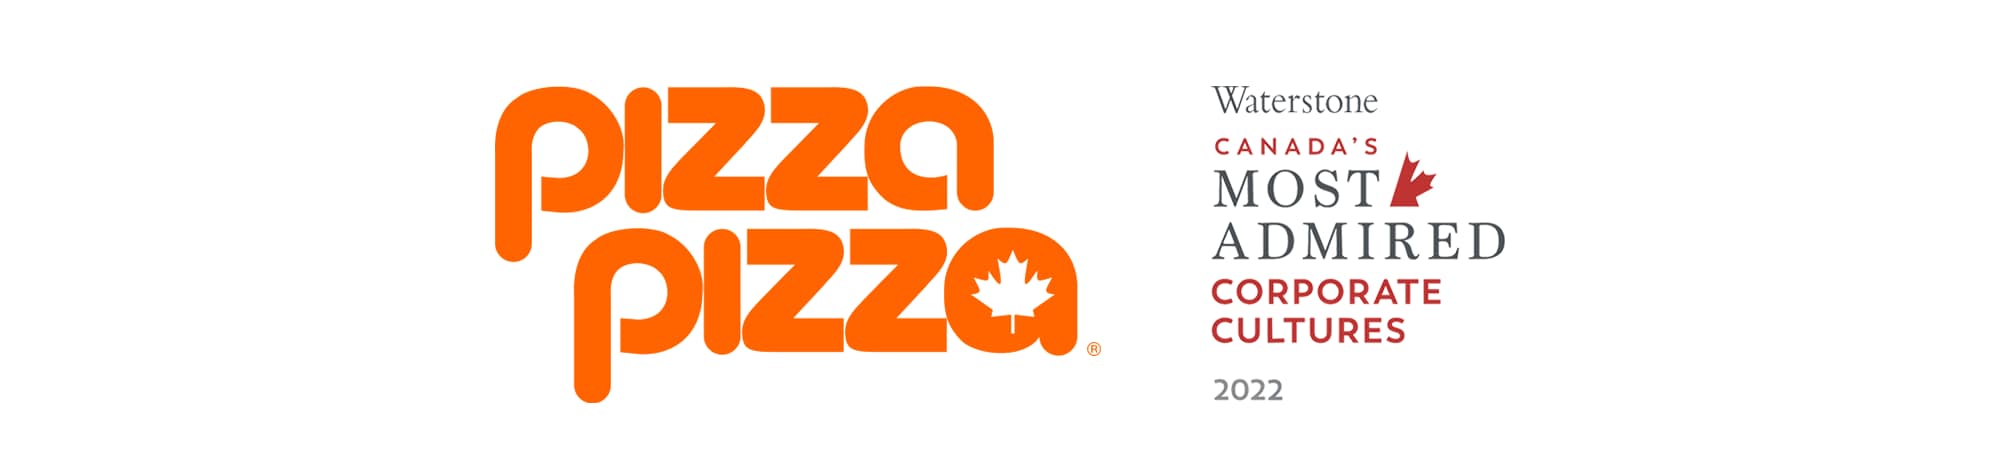 Canada's Most Admired Corporate Cultures™ Award - Pizza Pizza